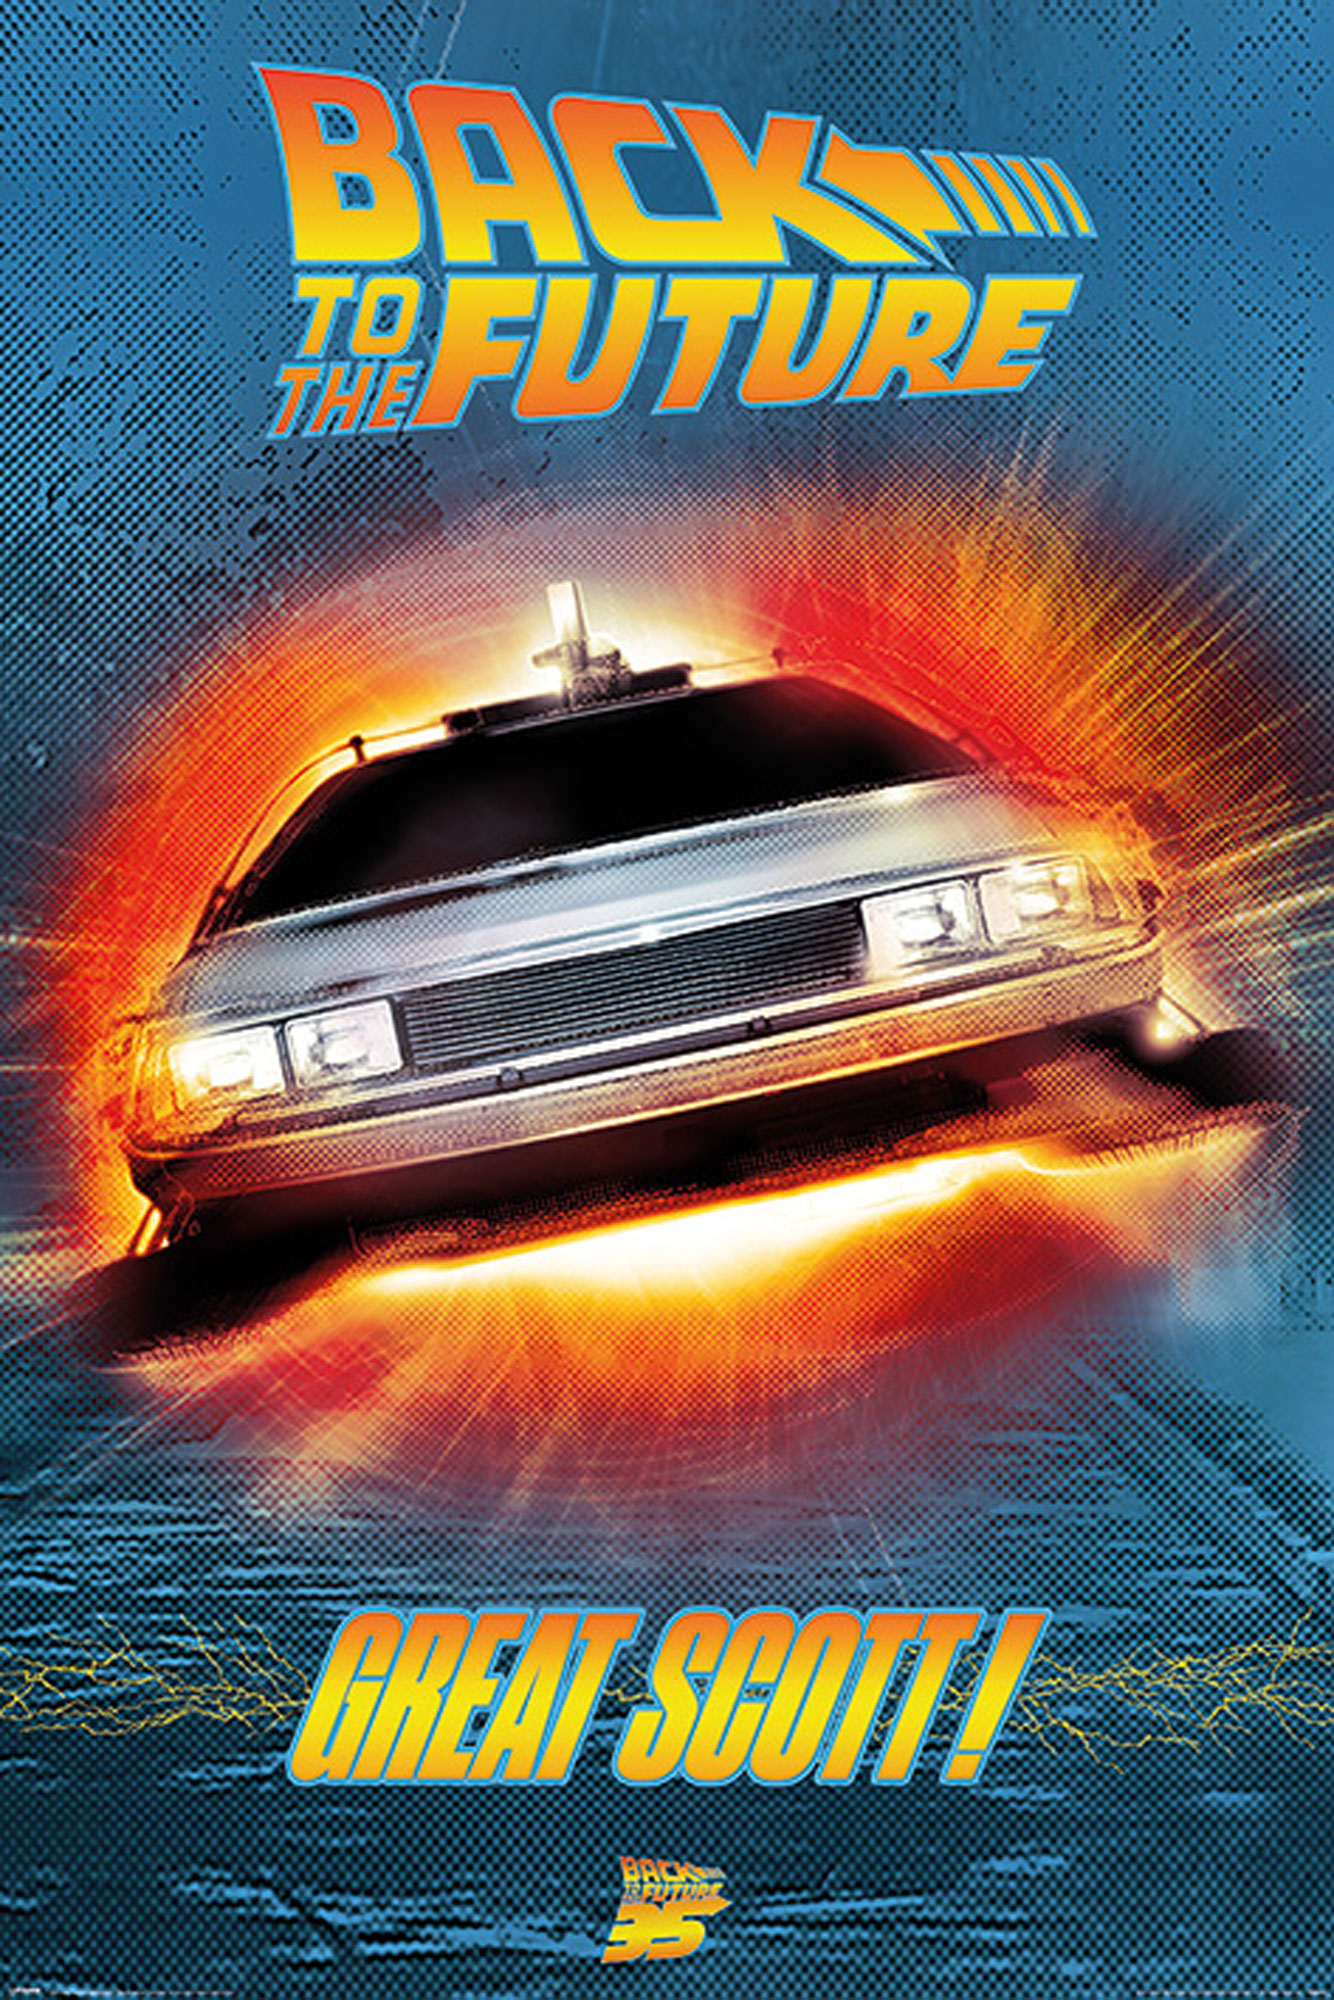 The Back Future Scott! - To Great